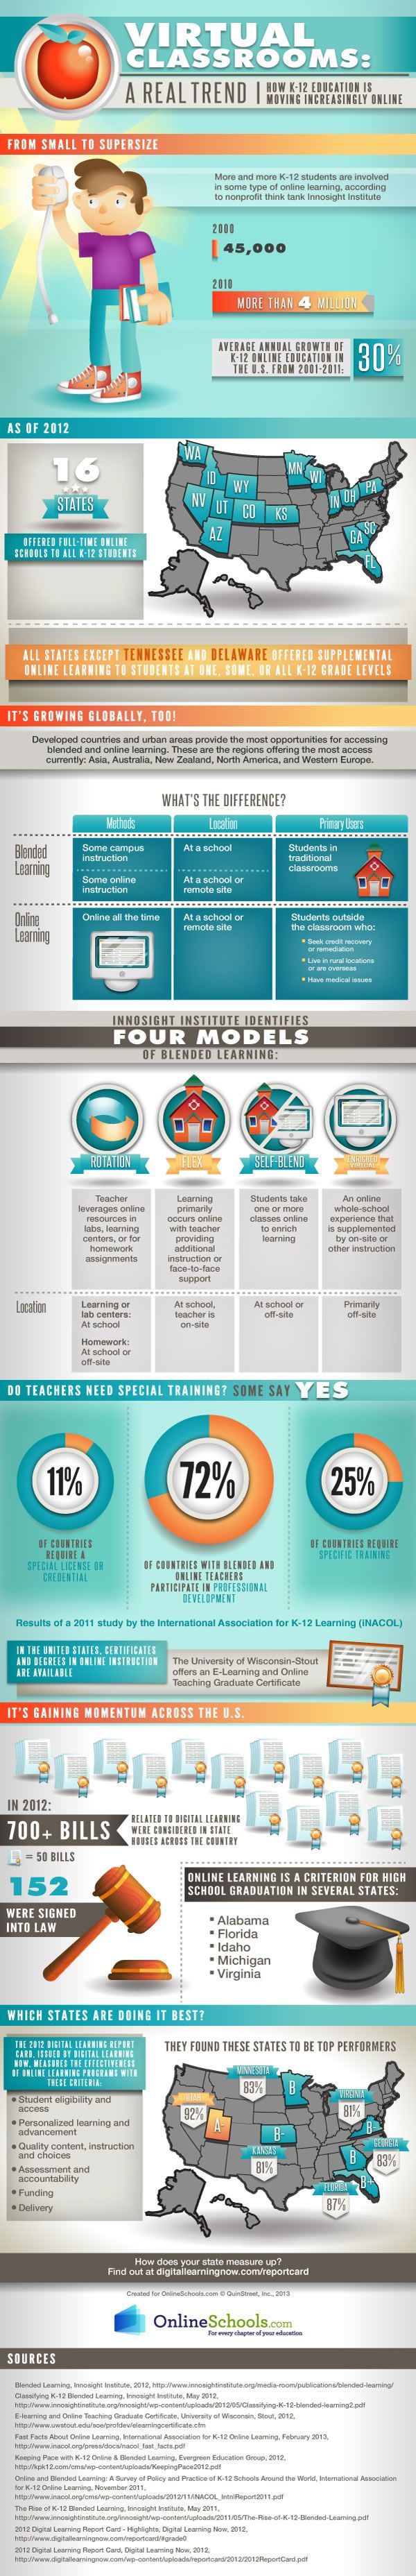 Online-and-Blended-Learning-K12-Infographic